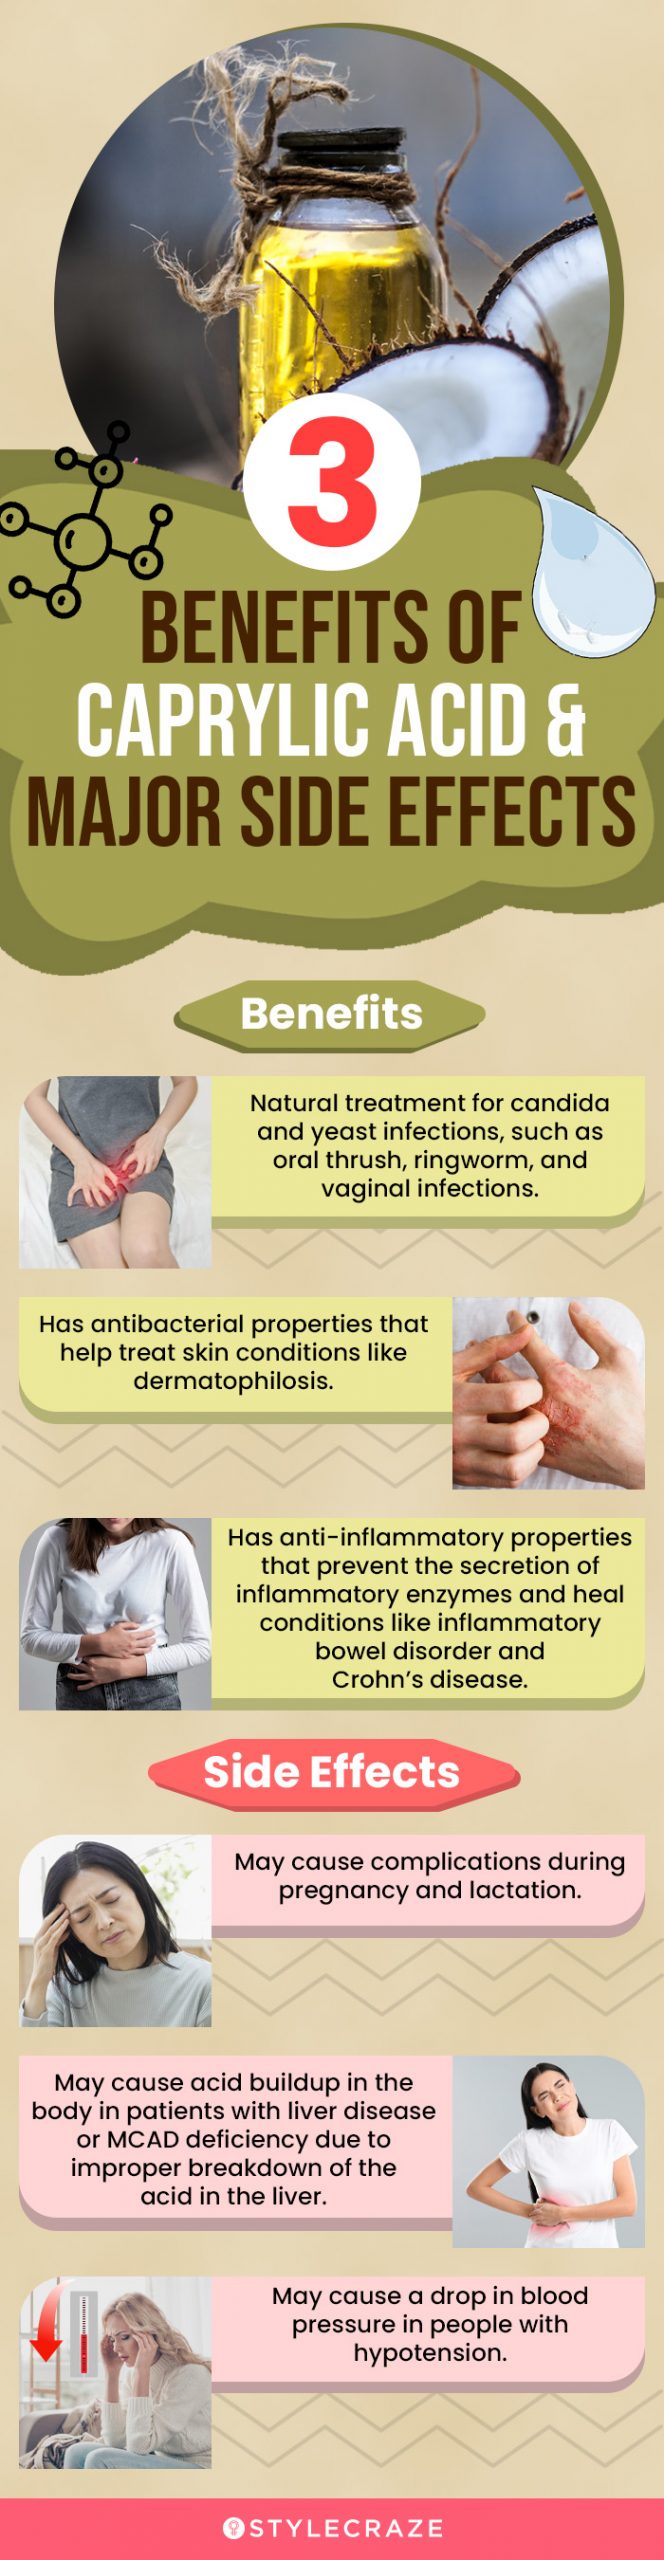 3 benefits of caprylic acid & major side effects (infographic)